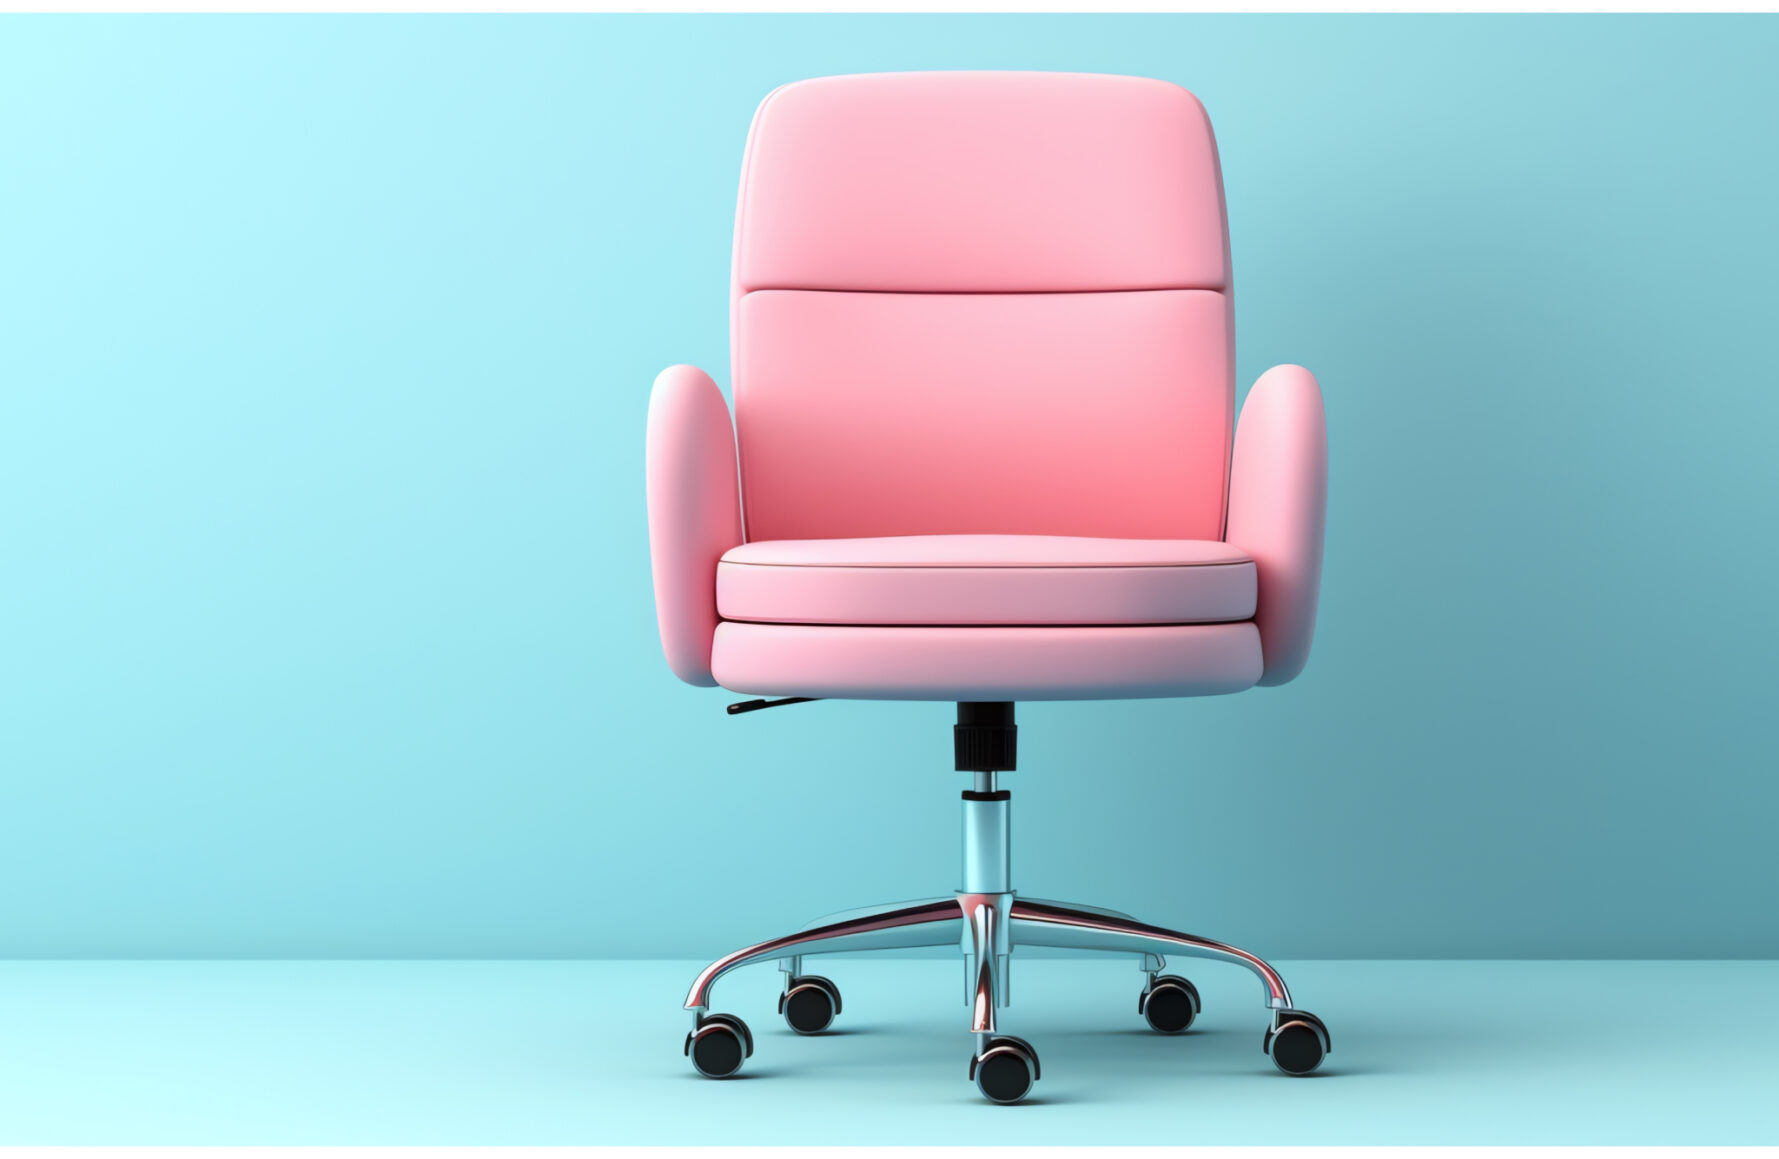 PINK cute office chairs